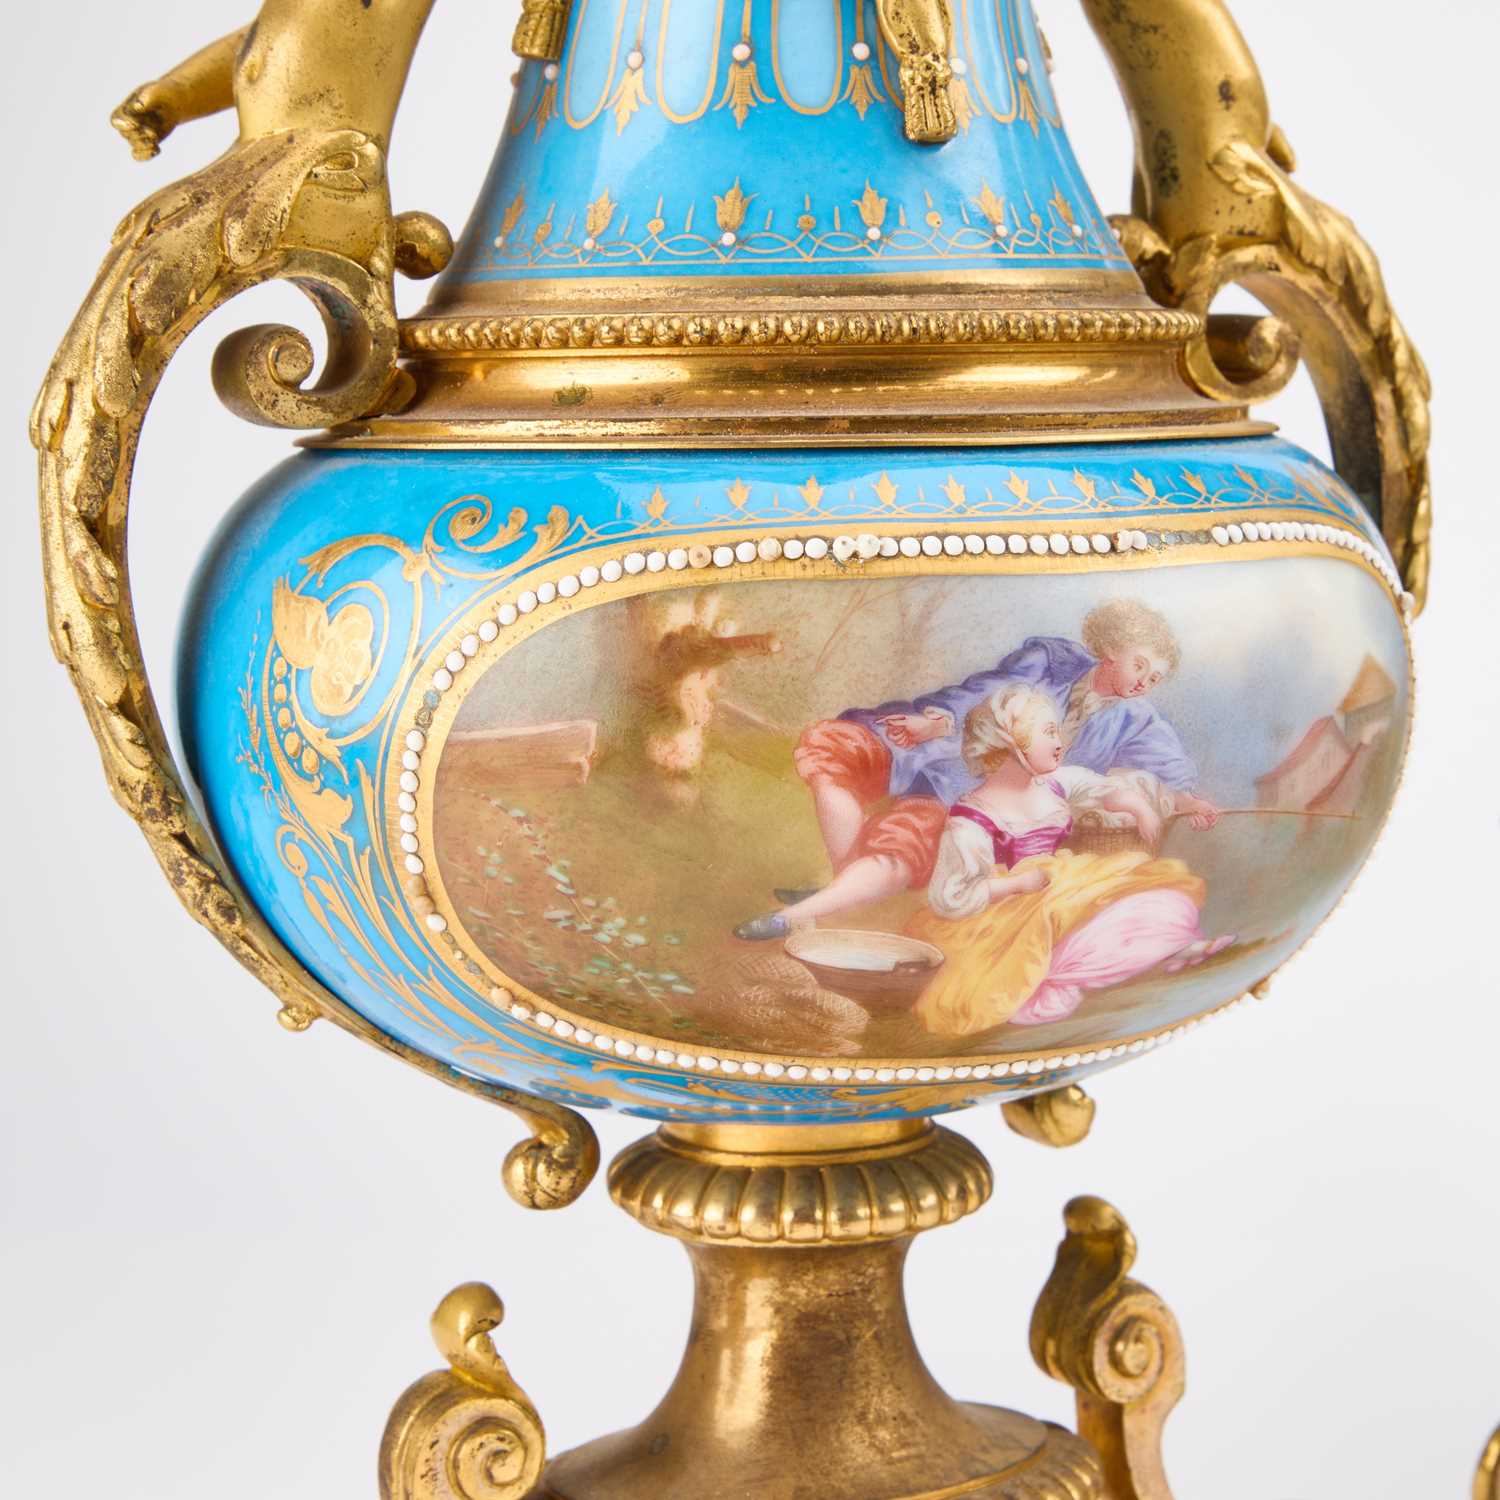 A FINE 19TH CENTURY FRENCH ORMOLU-MOUNTED 'SÈVRES' PORCELAIN CLOCK GARNITURE - Image 3 of 5